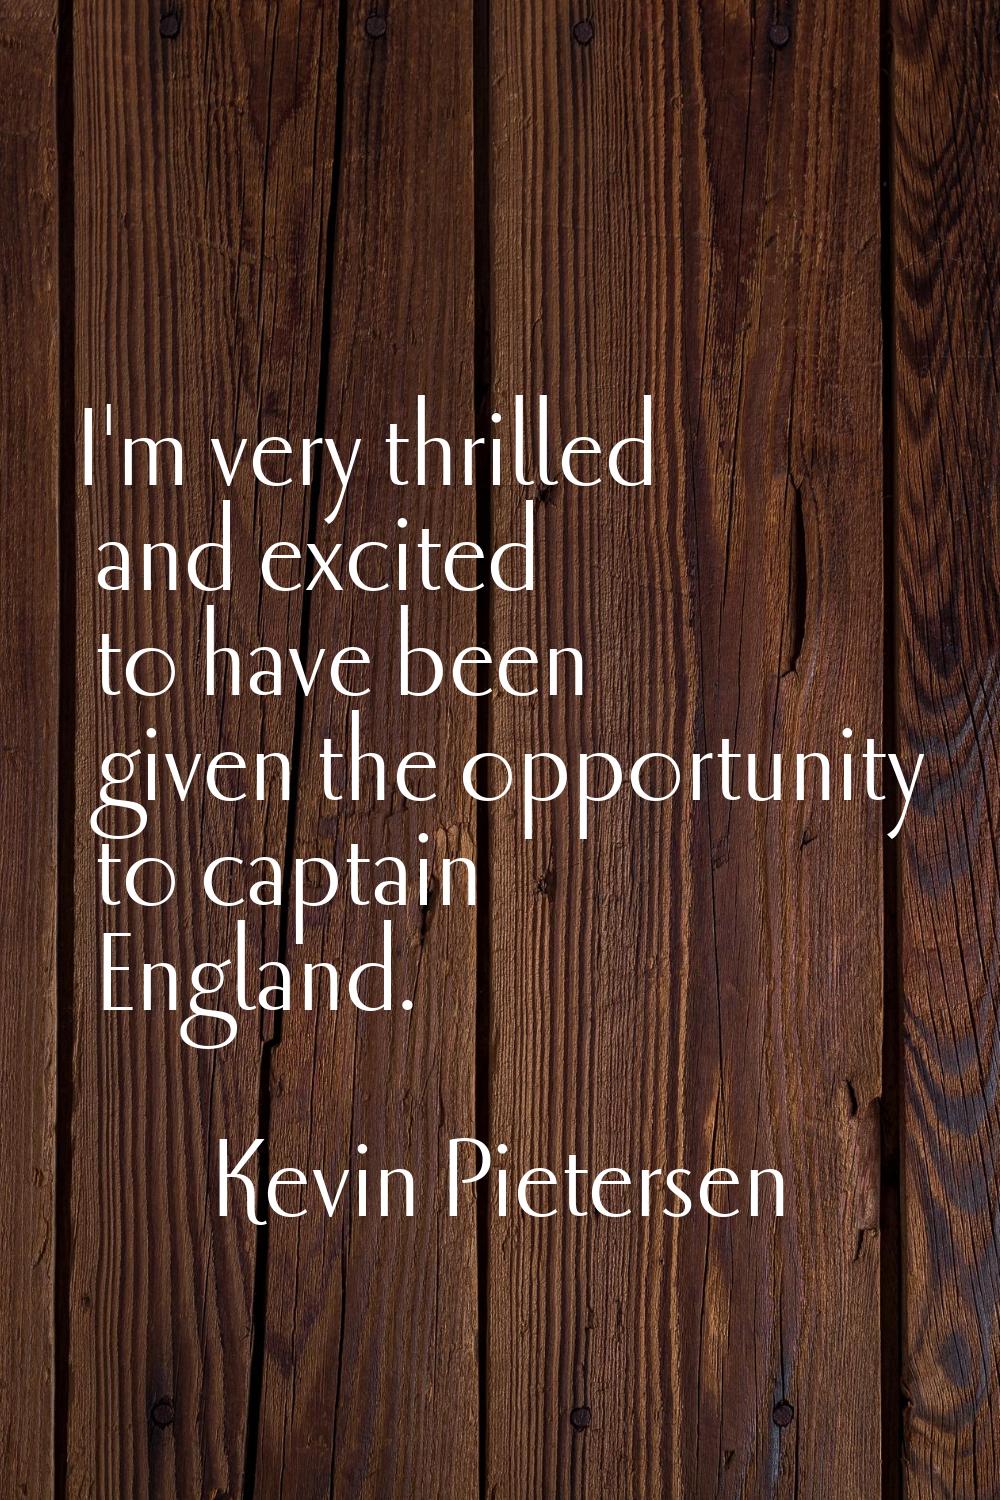 I'm very thrilled and excited to have been given the opportunity to captain England.